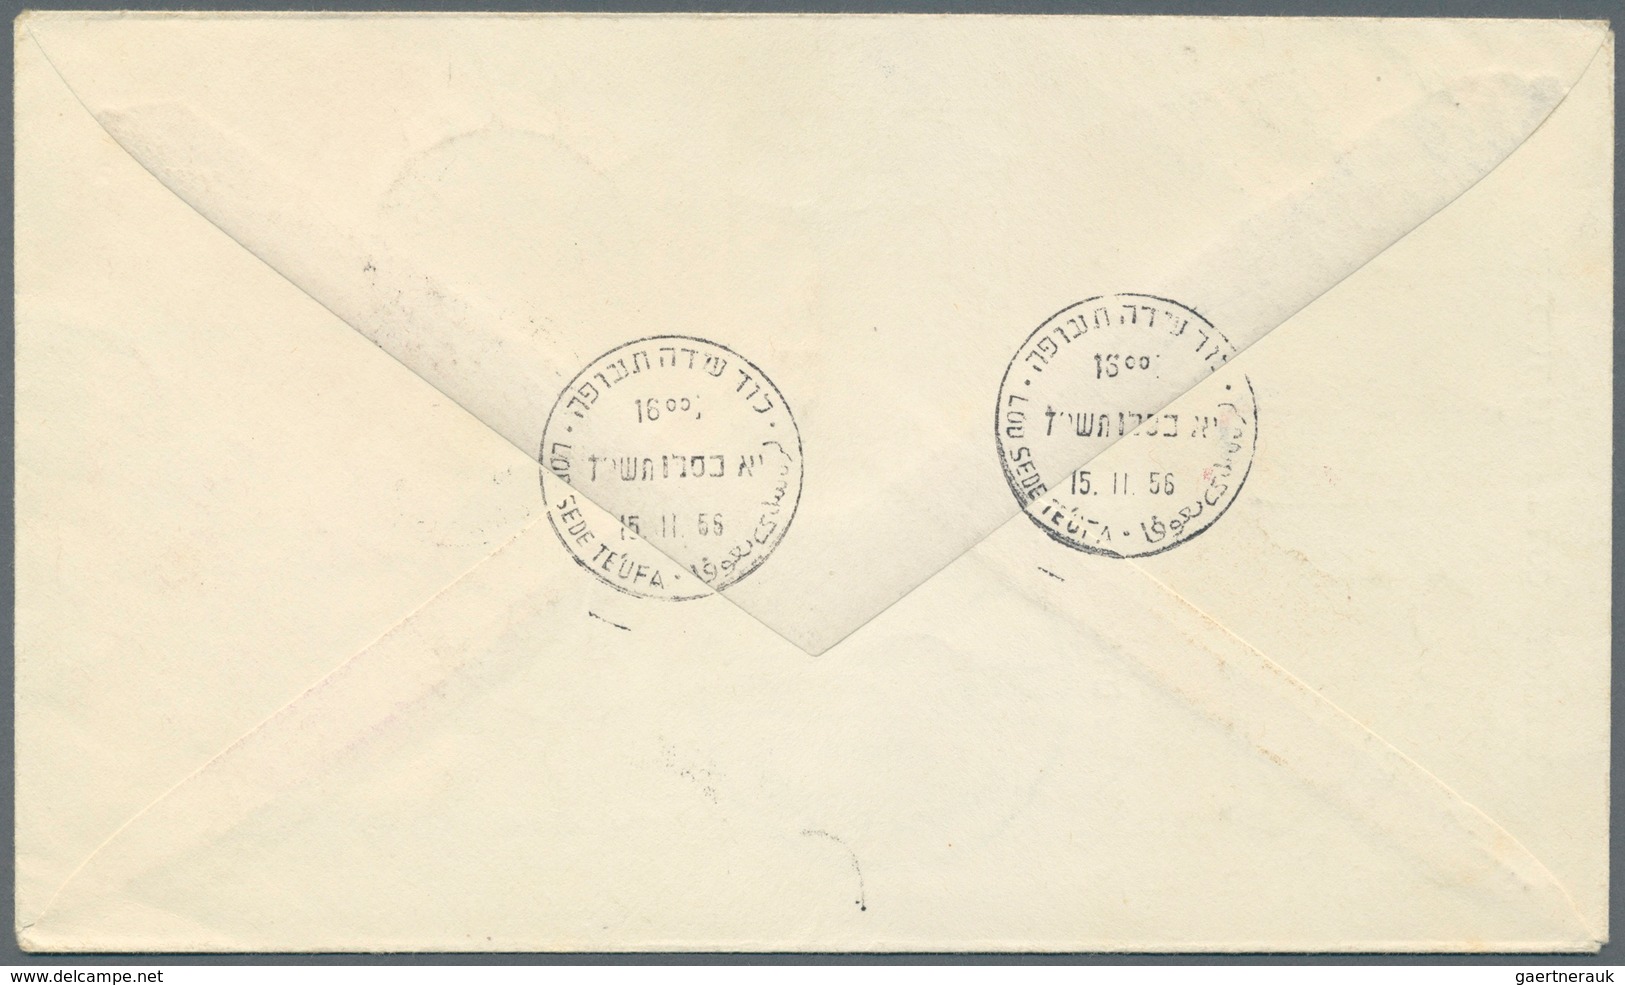 08961 Israel: 1956/67, Four covers during Wars: Three registered Special Flight covers on 15th Nov. 1957 L